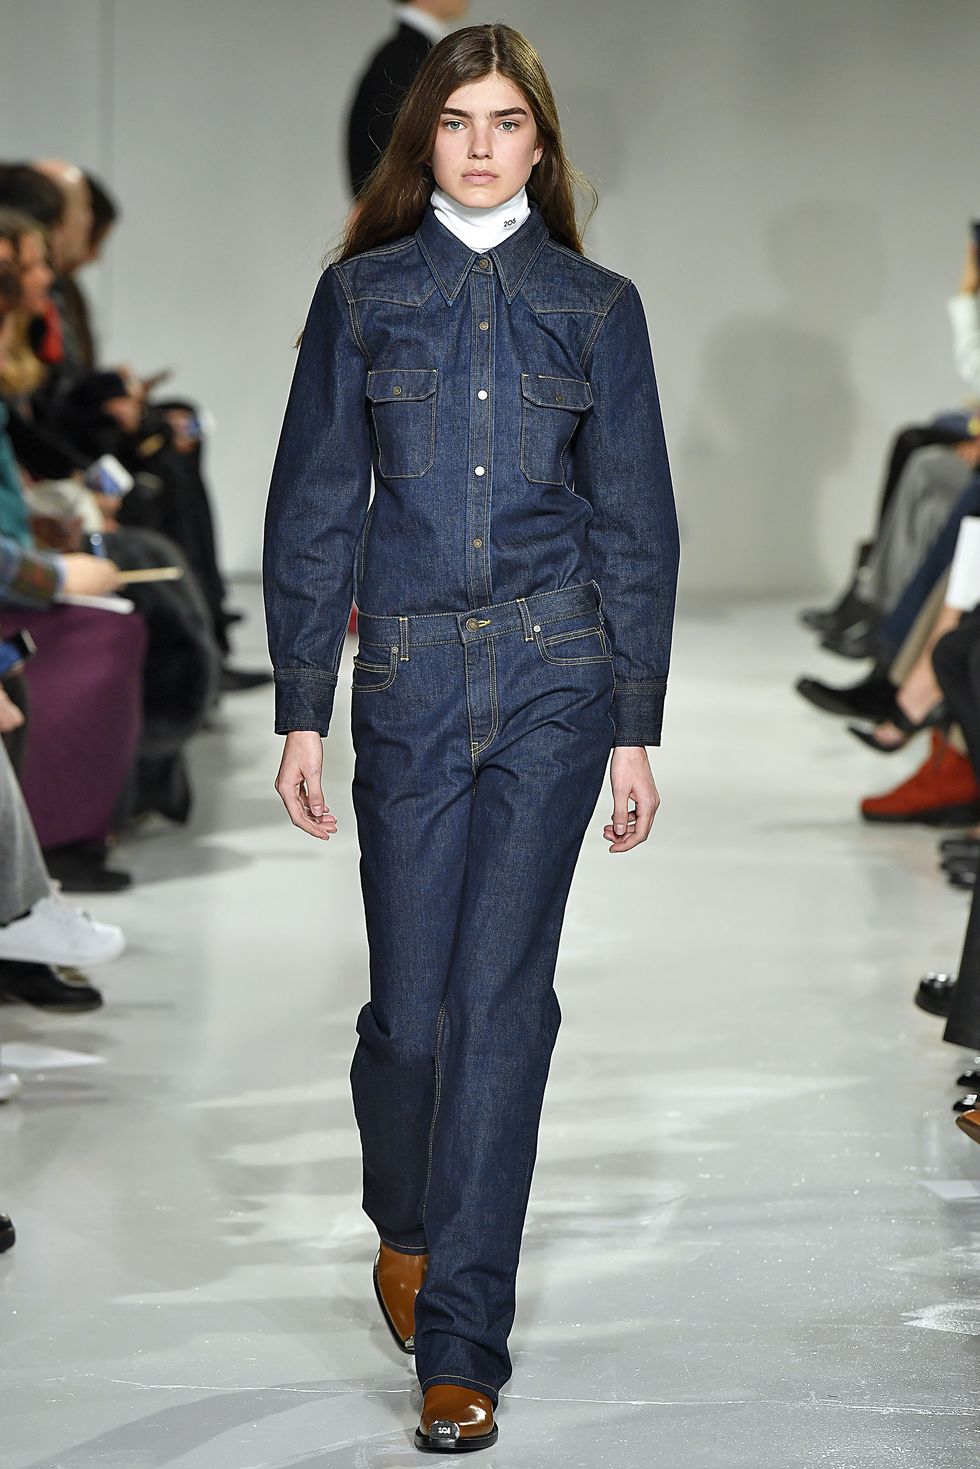 Clothing, Fashion show, Shoulder, Denim, Textile, Joint, Outerwear, Runway, Fashion model, Style, 